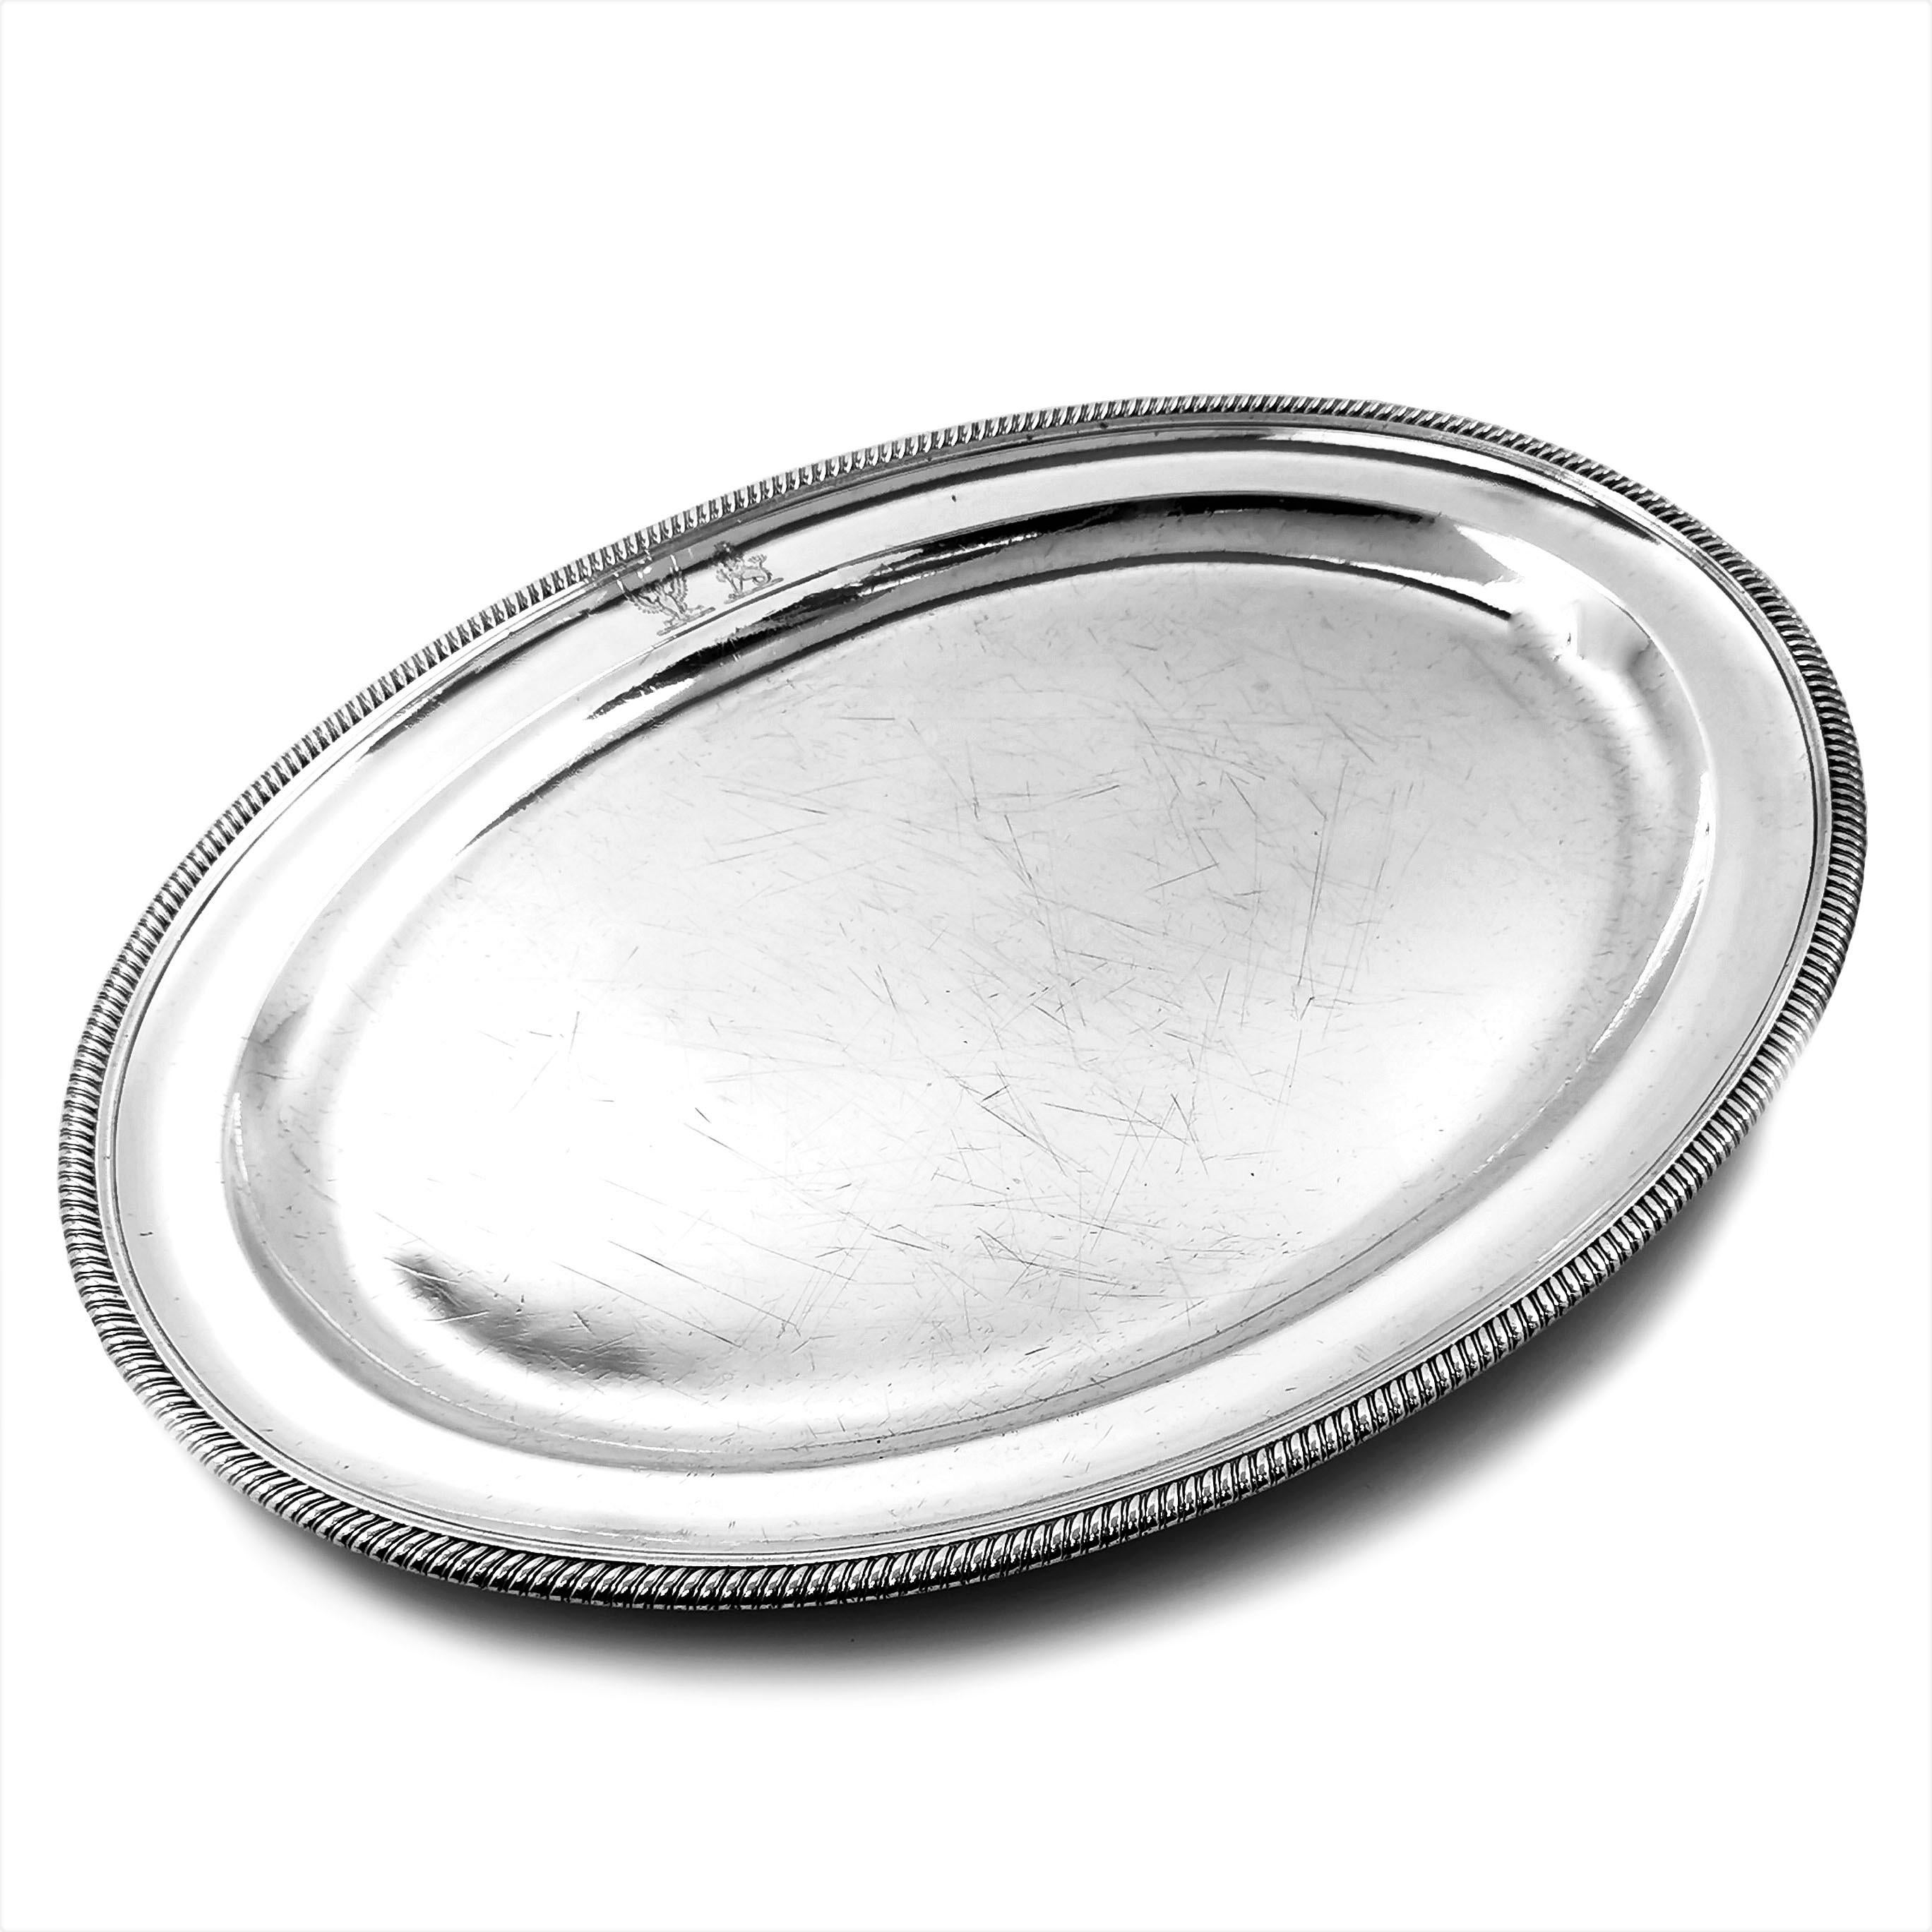 A superb Antique George III solid Silver Serving Platter. This impressive Platter has a classic Georgian oval design with a gadroon pattern border around the rim. The Platter has two engraved crests on the upper rim.

Made in London in 1806 by